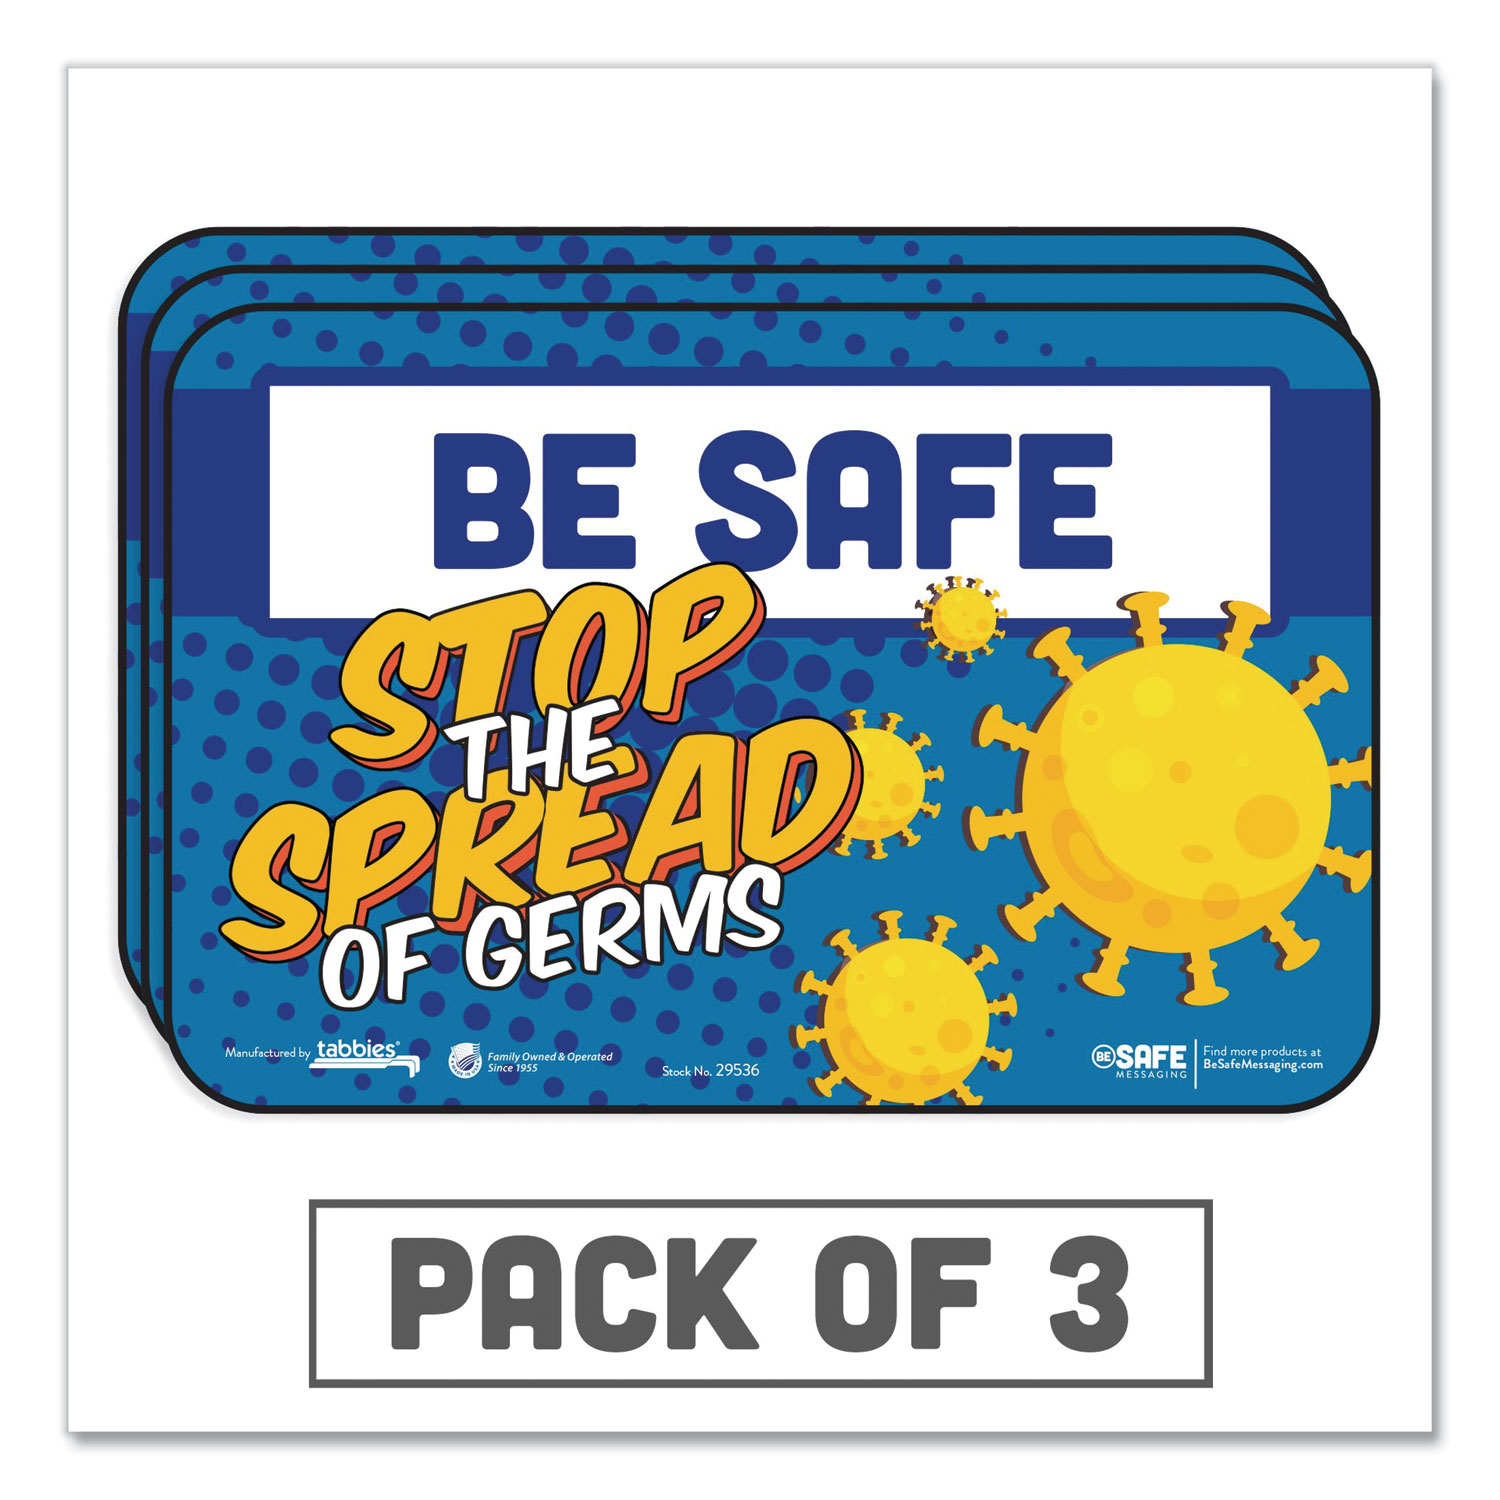  Tabbies 29536 BeSafe Messaging Education Wall Signs, 9 x 6,  Be Safe, Stop The Spread Of Germs, 3/Pack (TAB29536) 